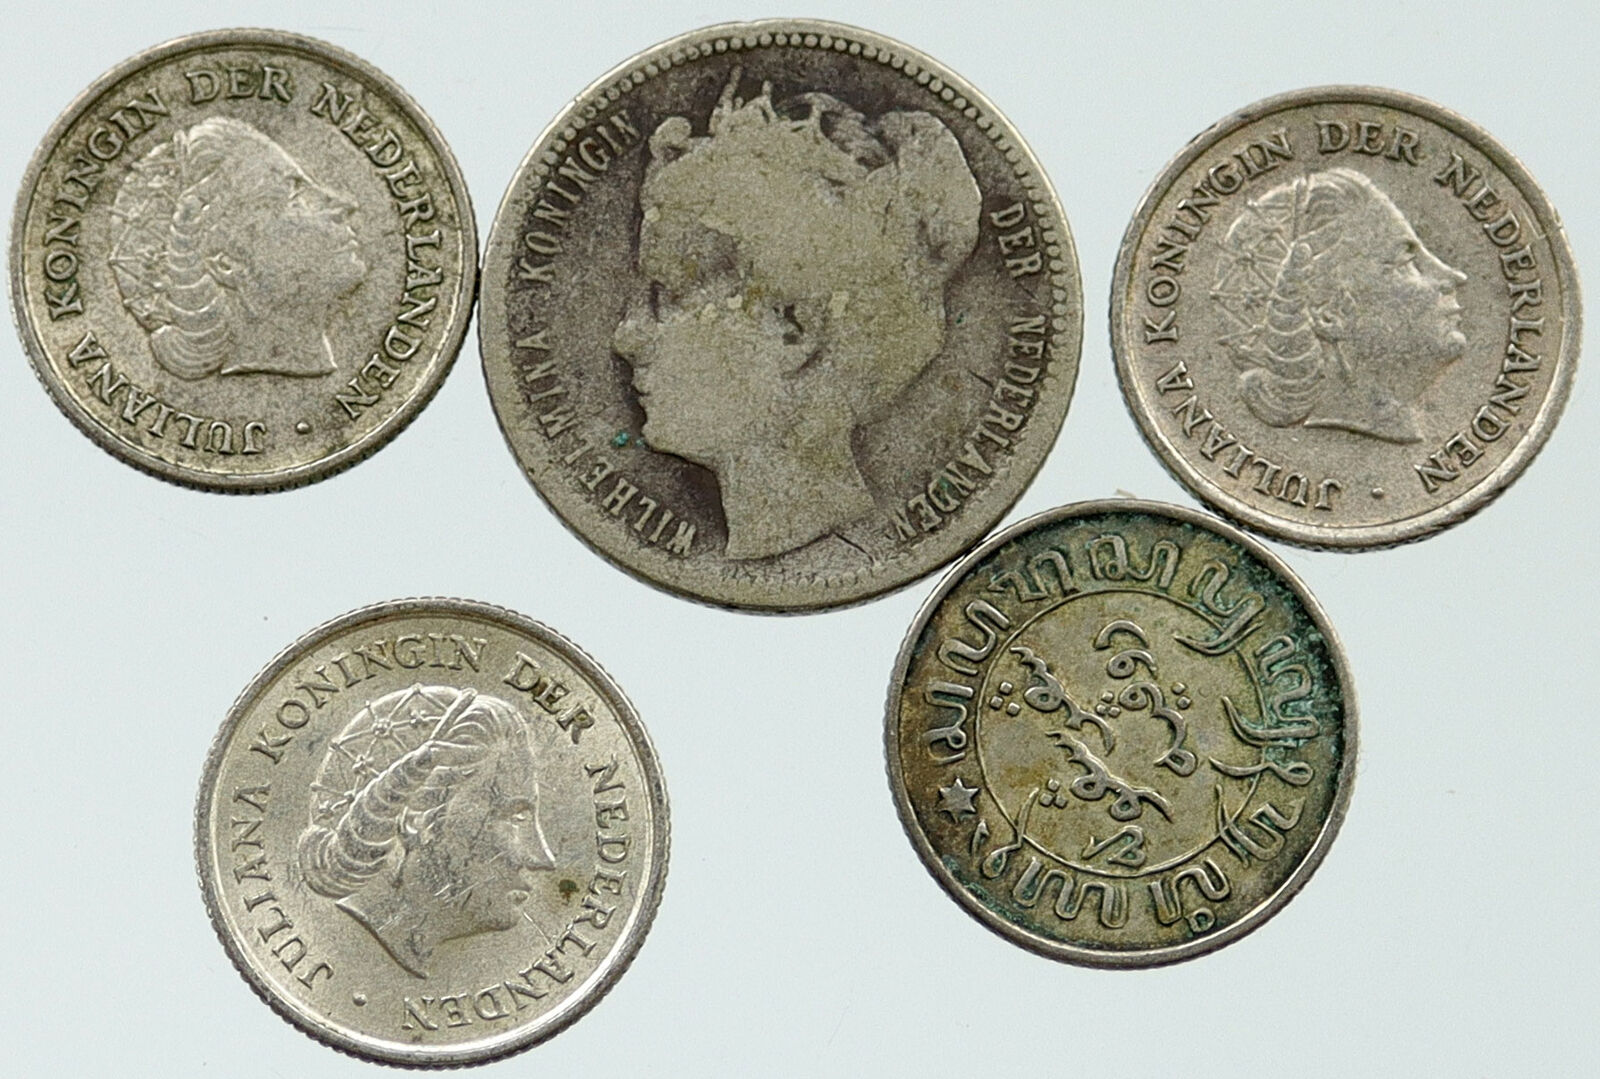 Lot of 5 Silver WORLD COINS Authentic Collection Vintage Group DEAL GIFT i115384